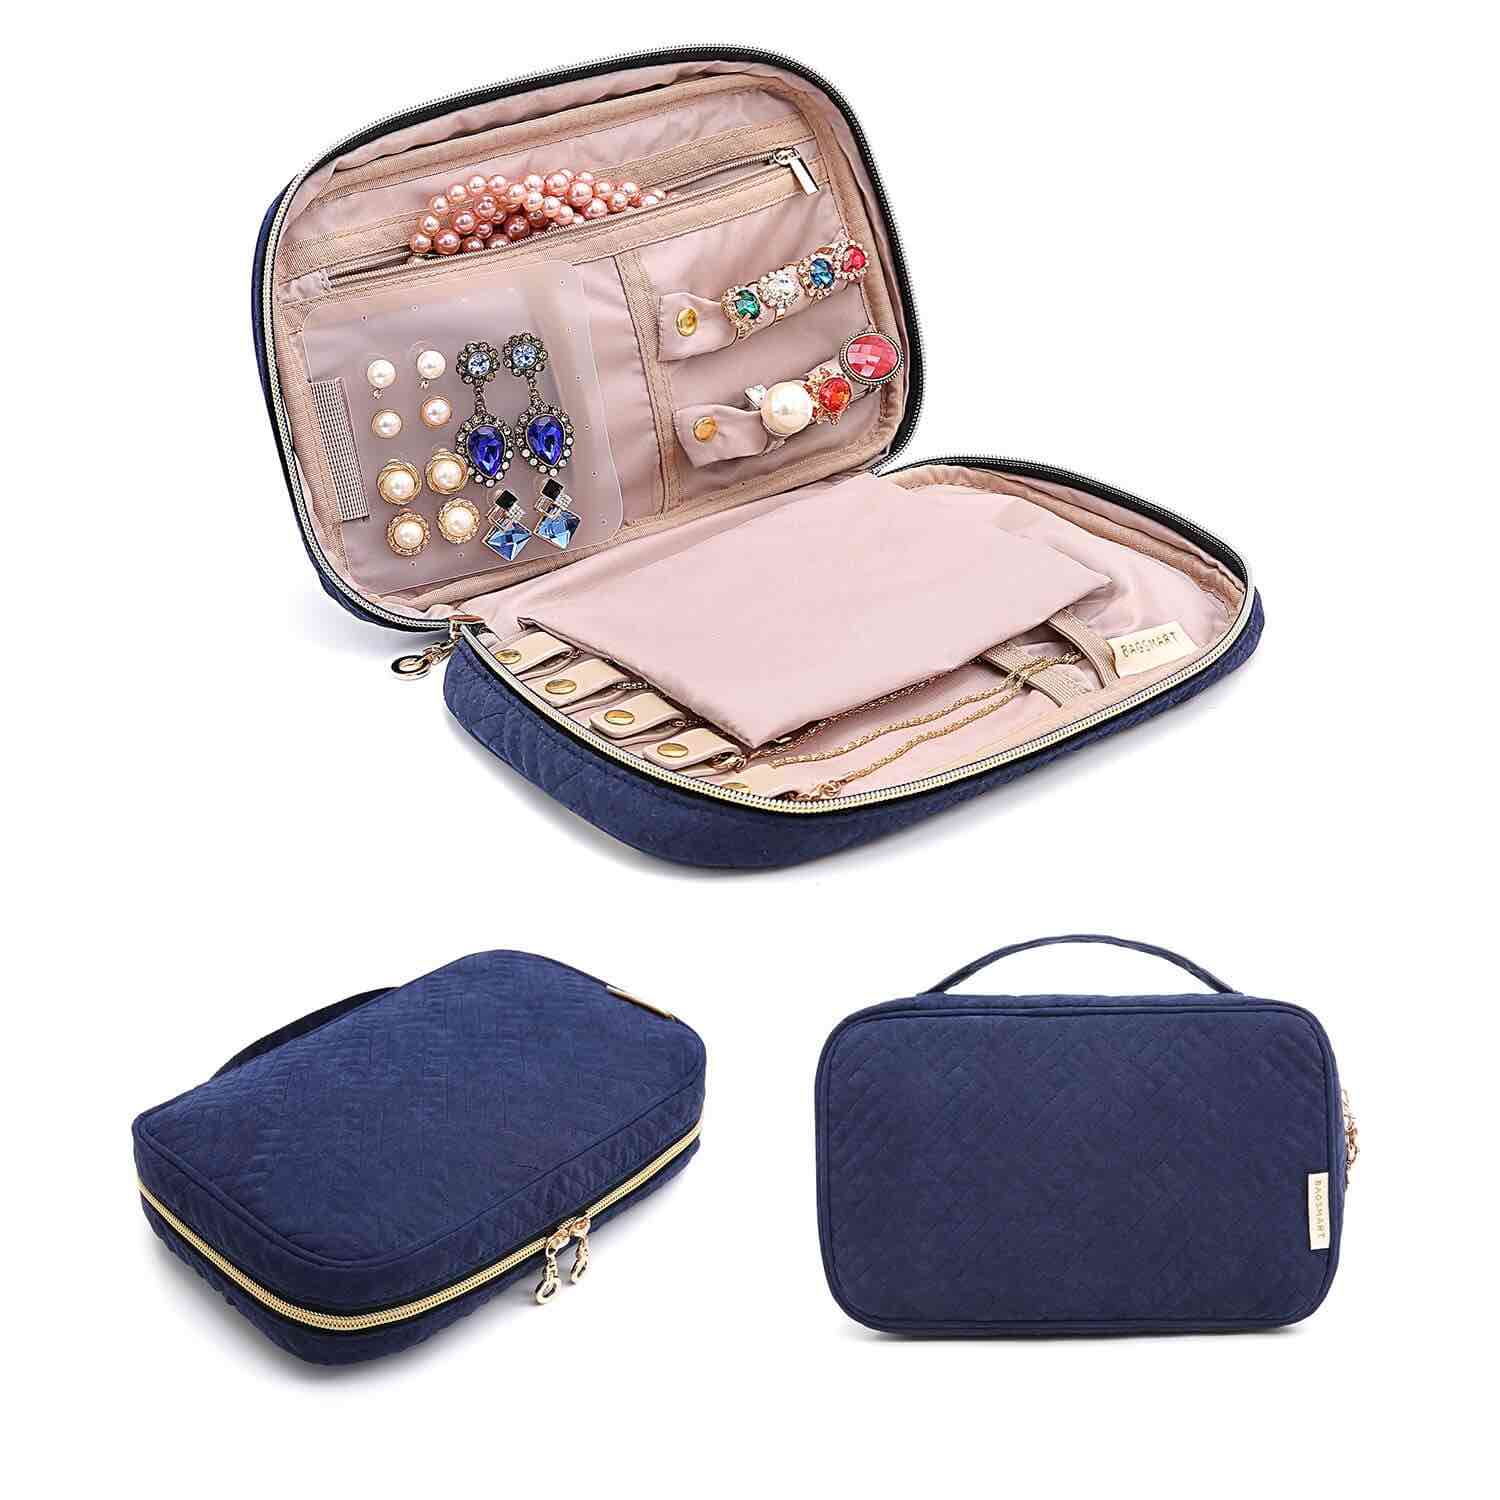 jewelry organizer, The Travel 100 gift guide